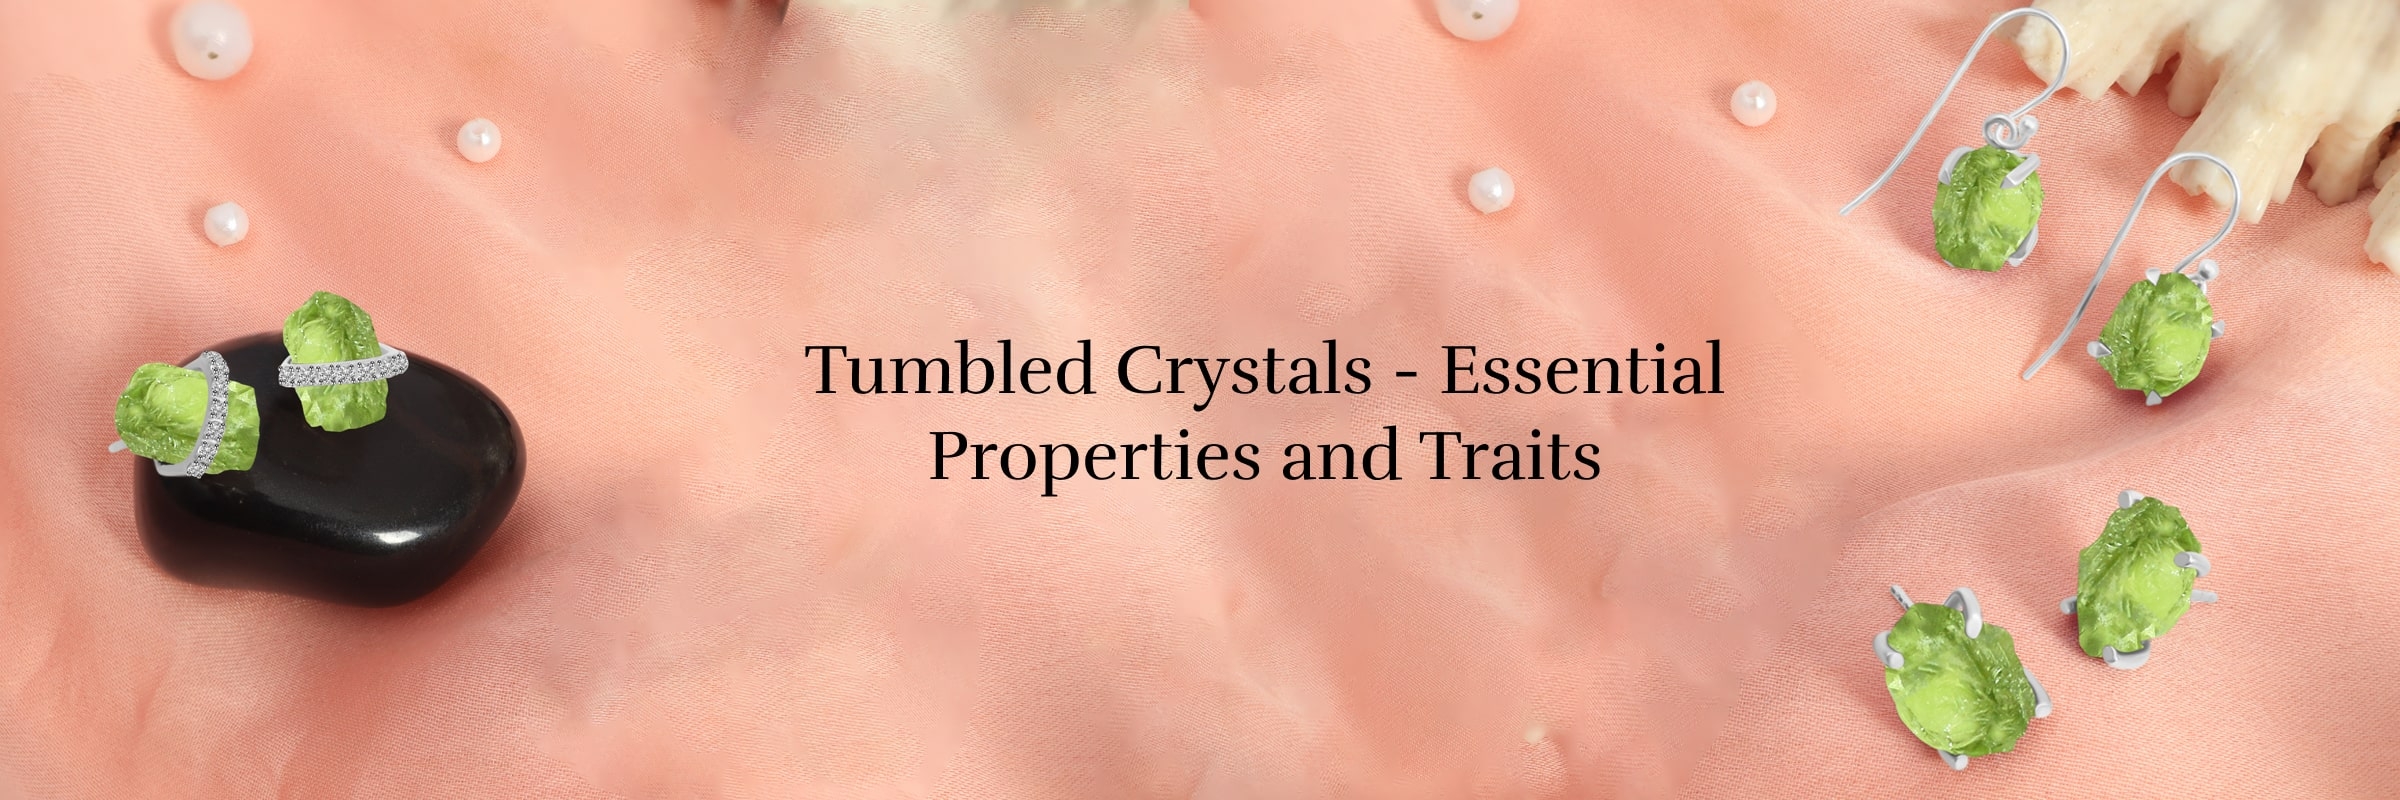 Properties and Characteristics of Tumbled Crystals